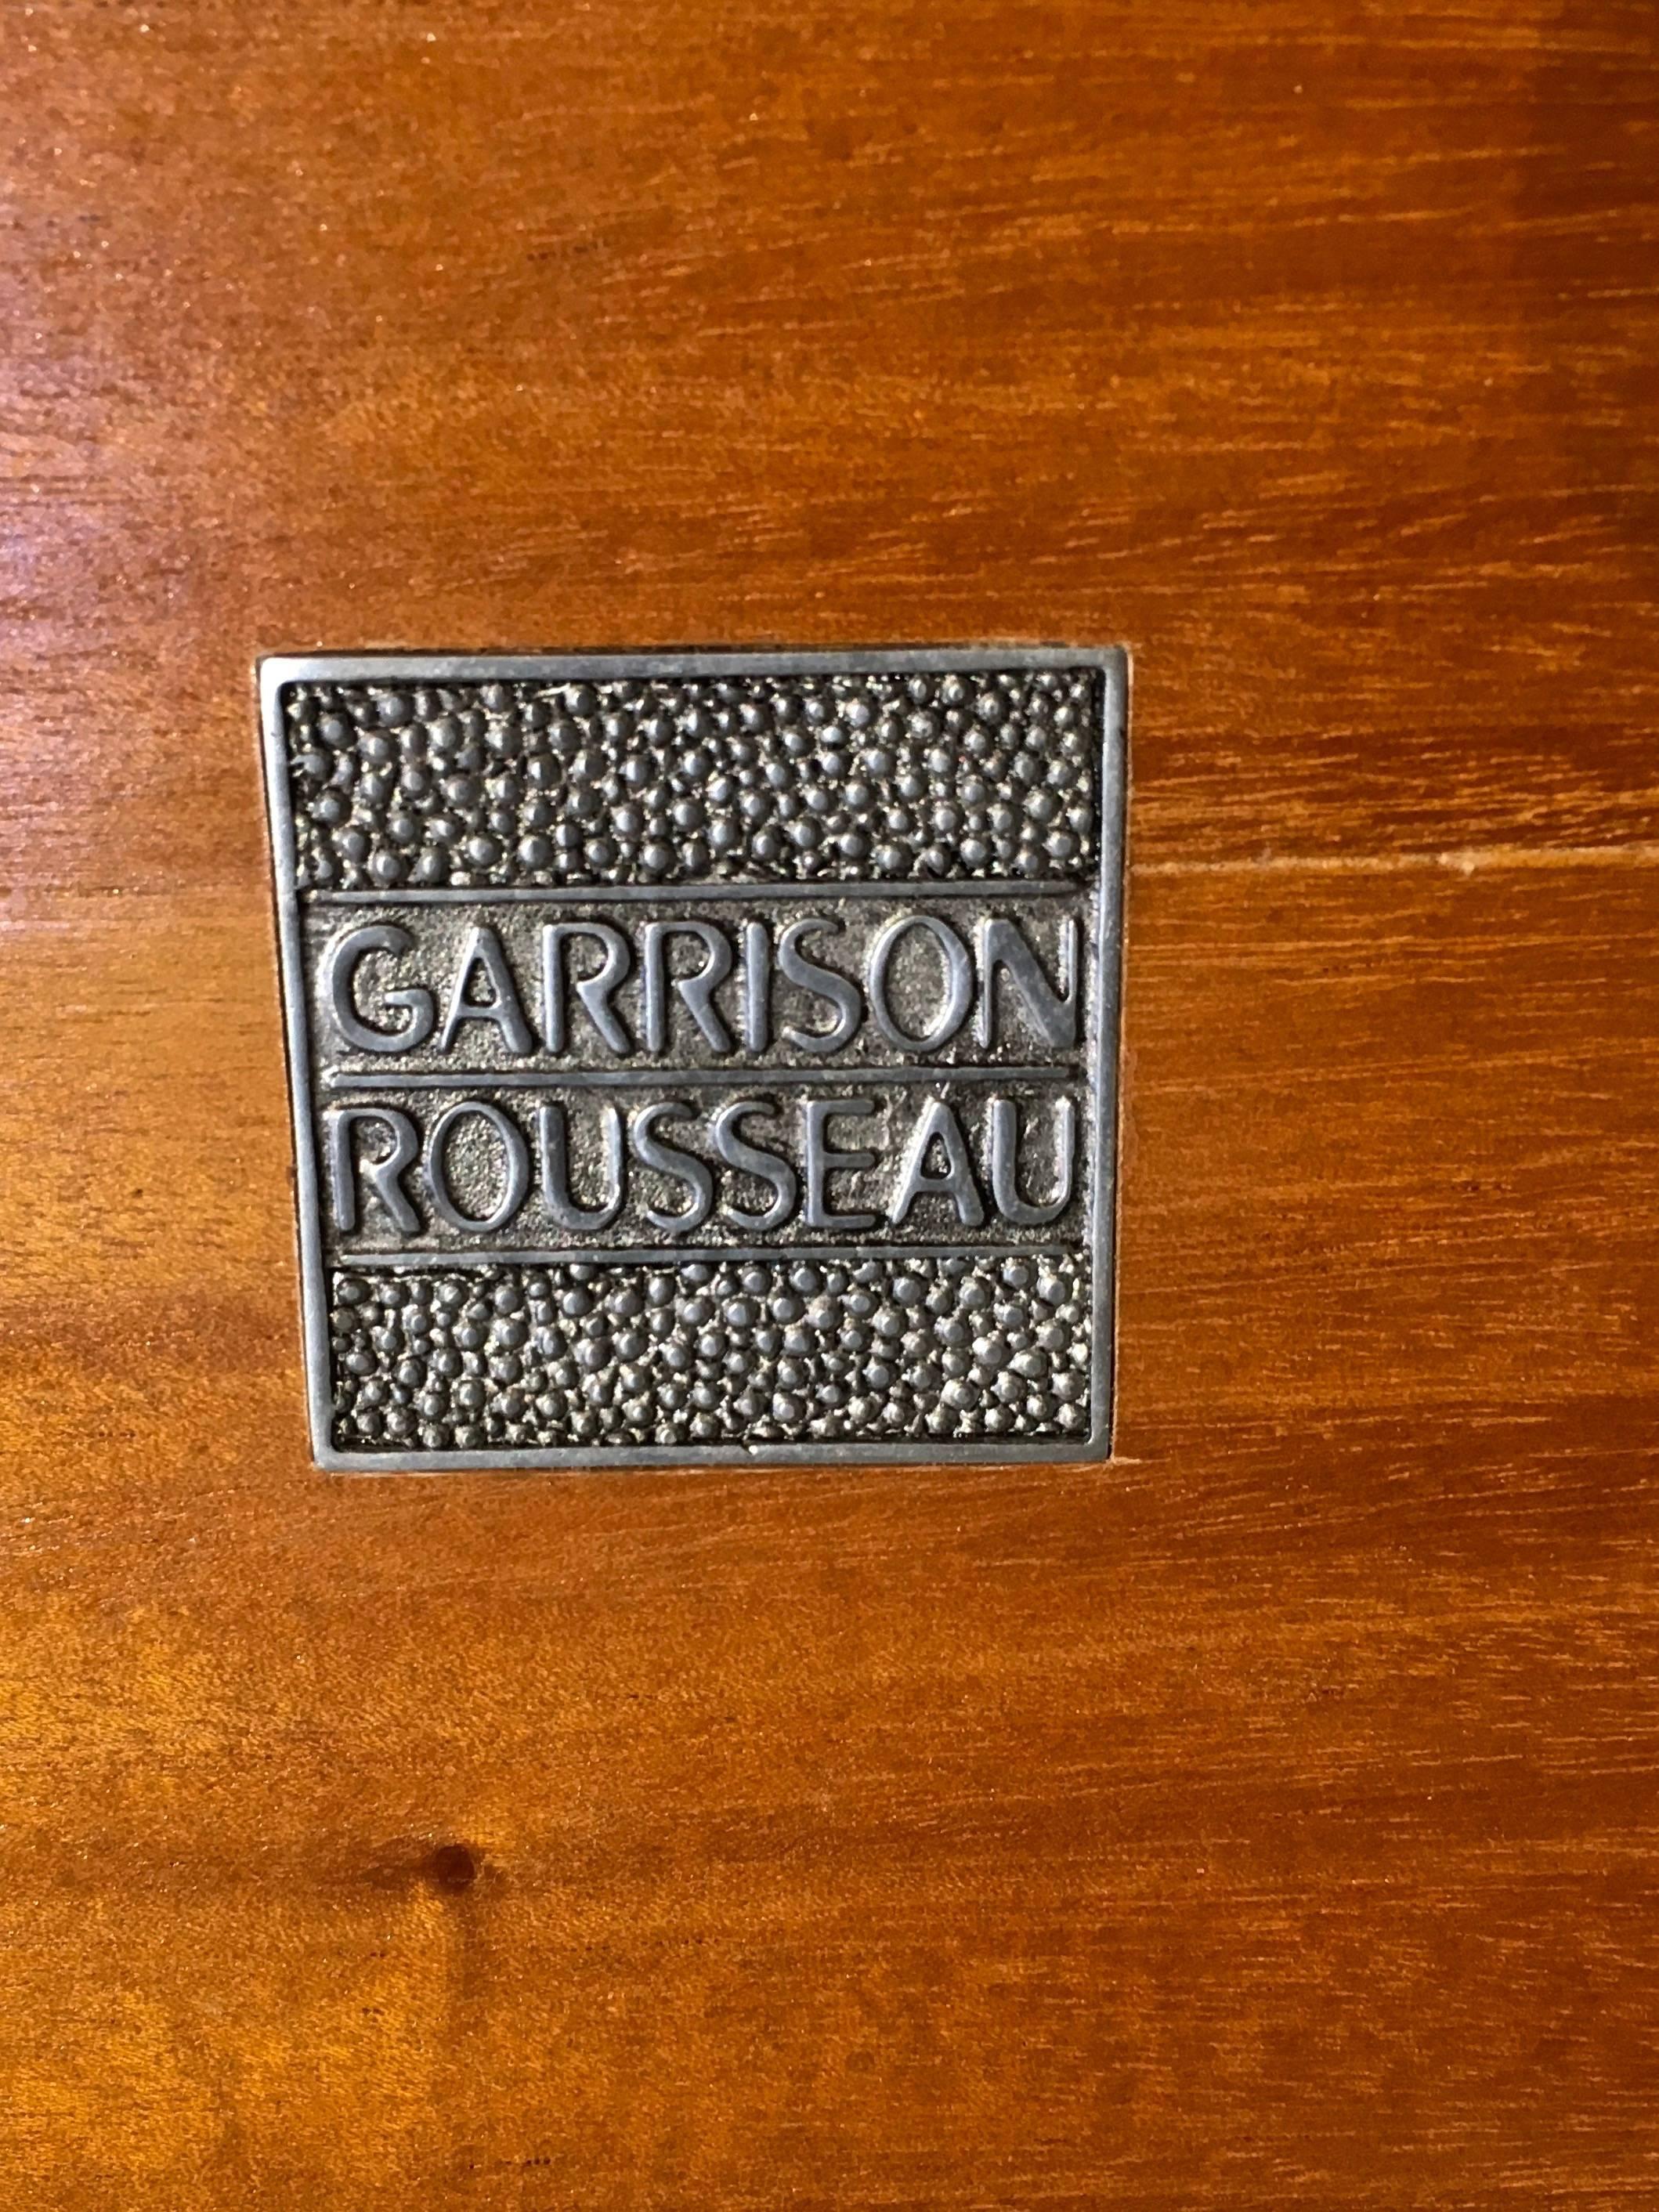 Pair of Shagreen Tables by Garrison Rousseau 1